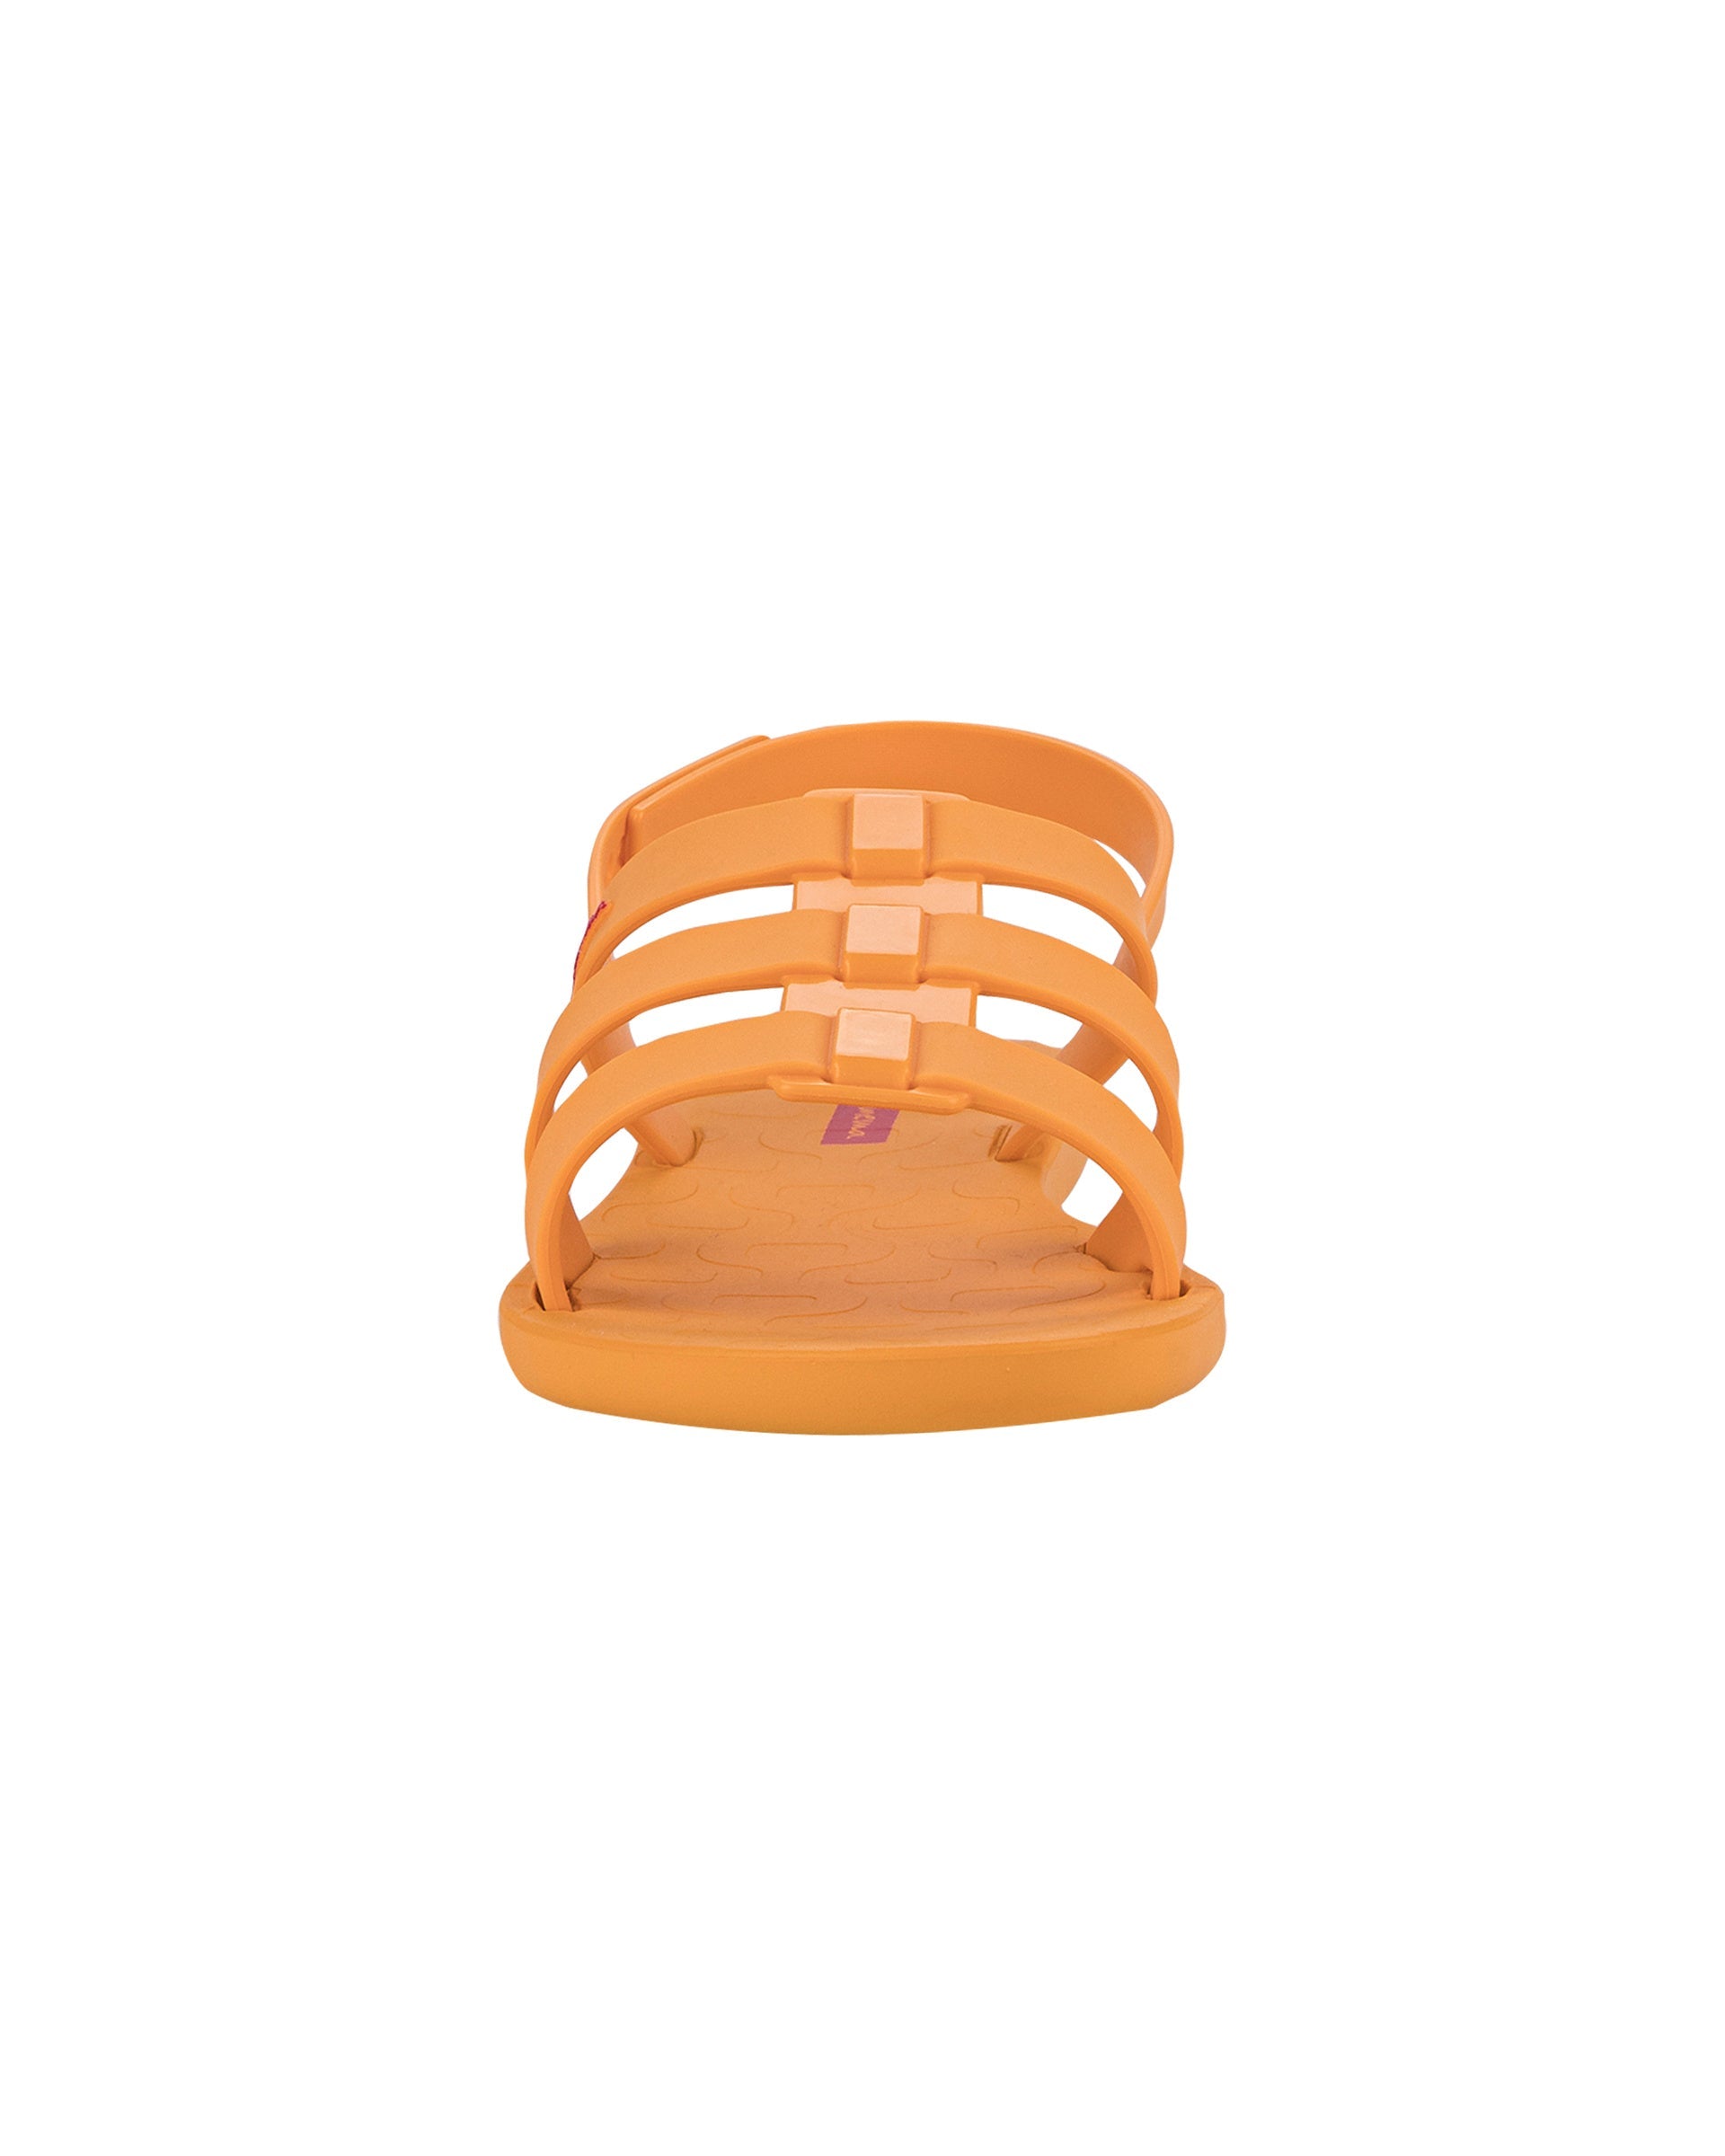 Front view of a orange Ipanema Style women's sandal.